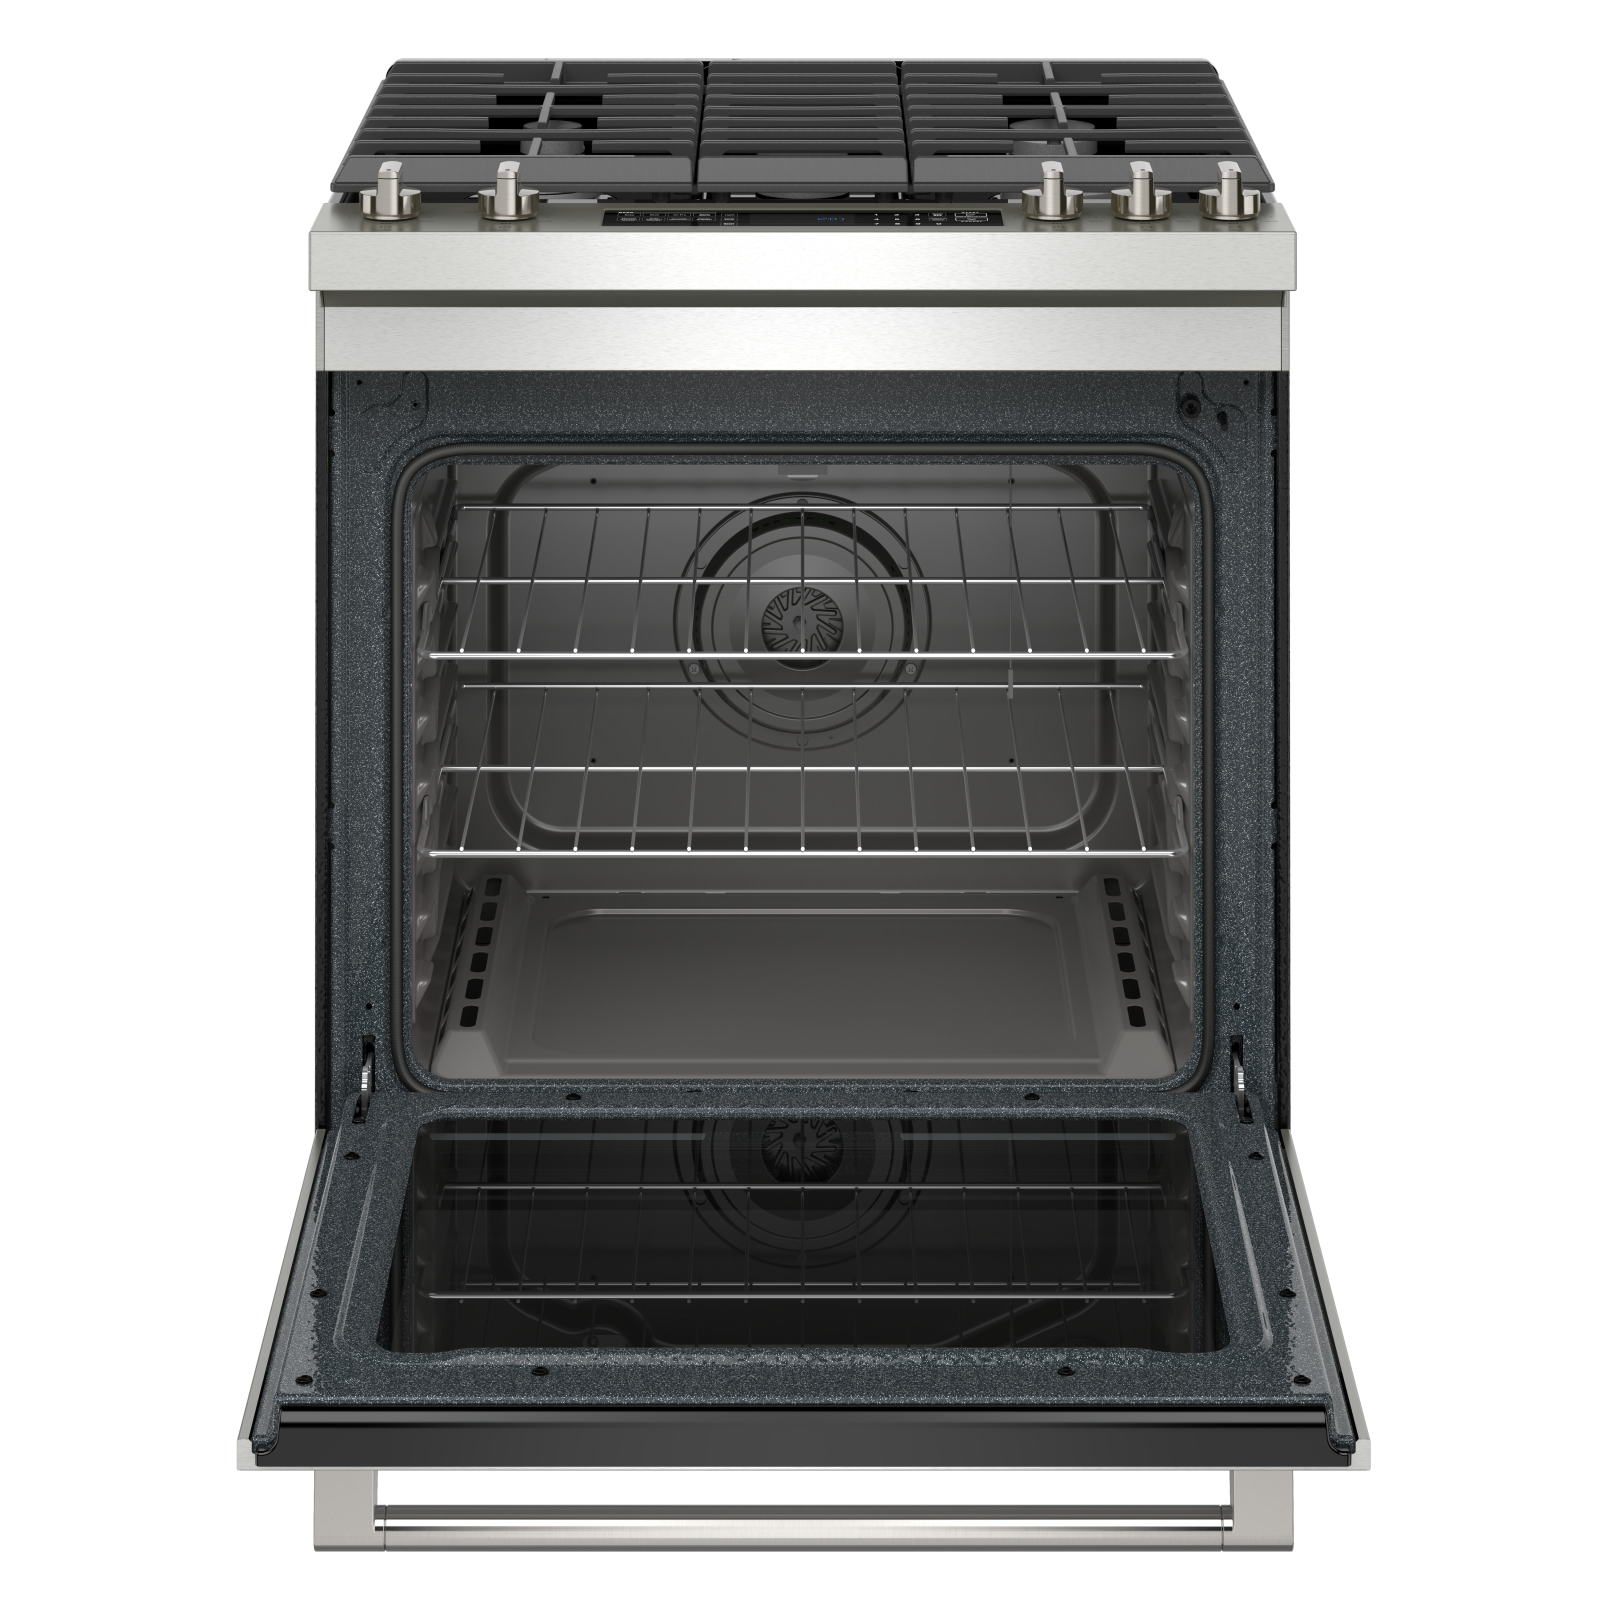 Maytag - 5.8 cu. ft  Gas Range in Stainless - MGS8800PZ